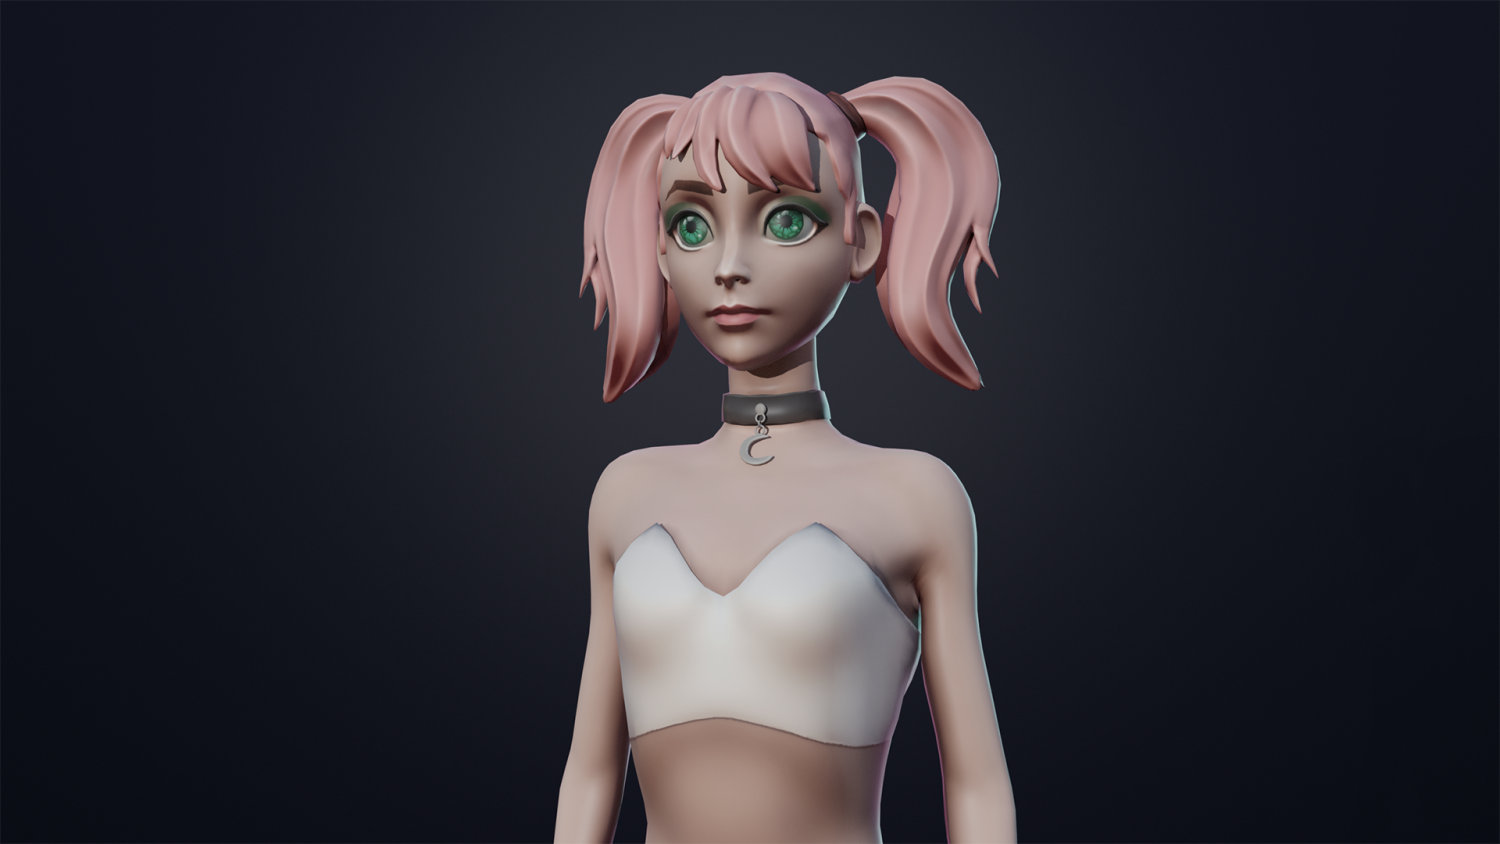 Stylized Cyberpunk 3D Animated Character in Characters - UE